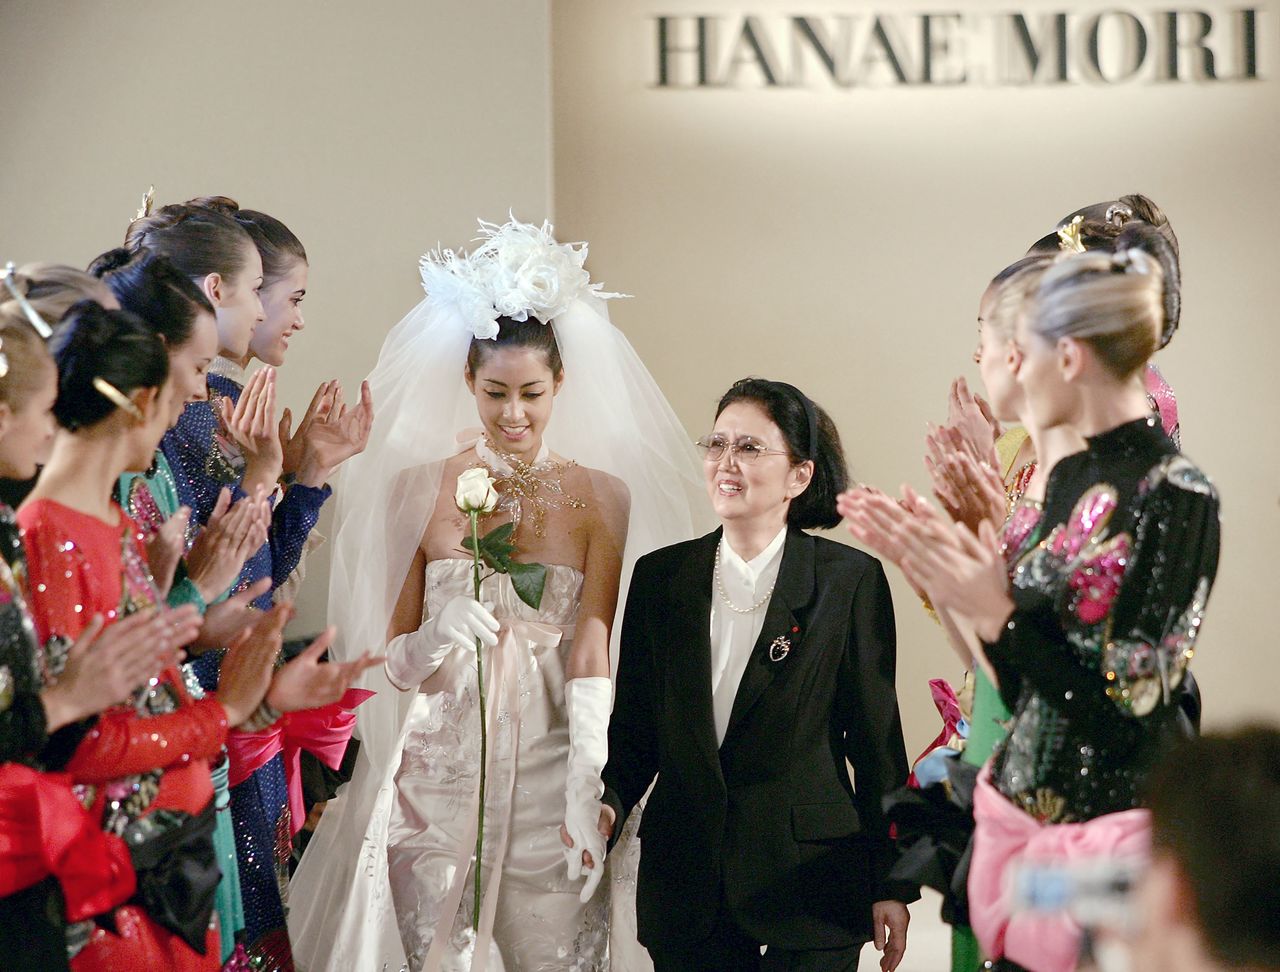     Mori Hana (center right) holds the hand of her granddaughter Mori Izumi at a show of her fall/winter haute couture collection in Paris on July 7, 2004. (Gigi Press)